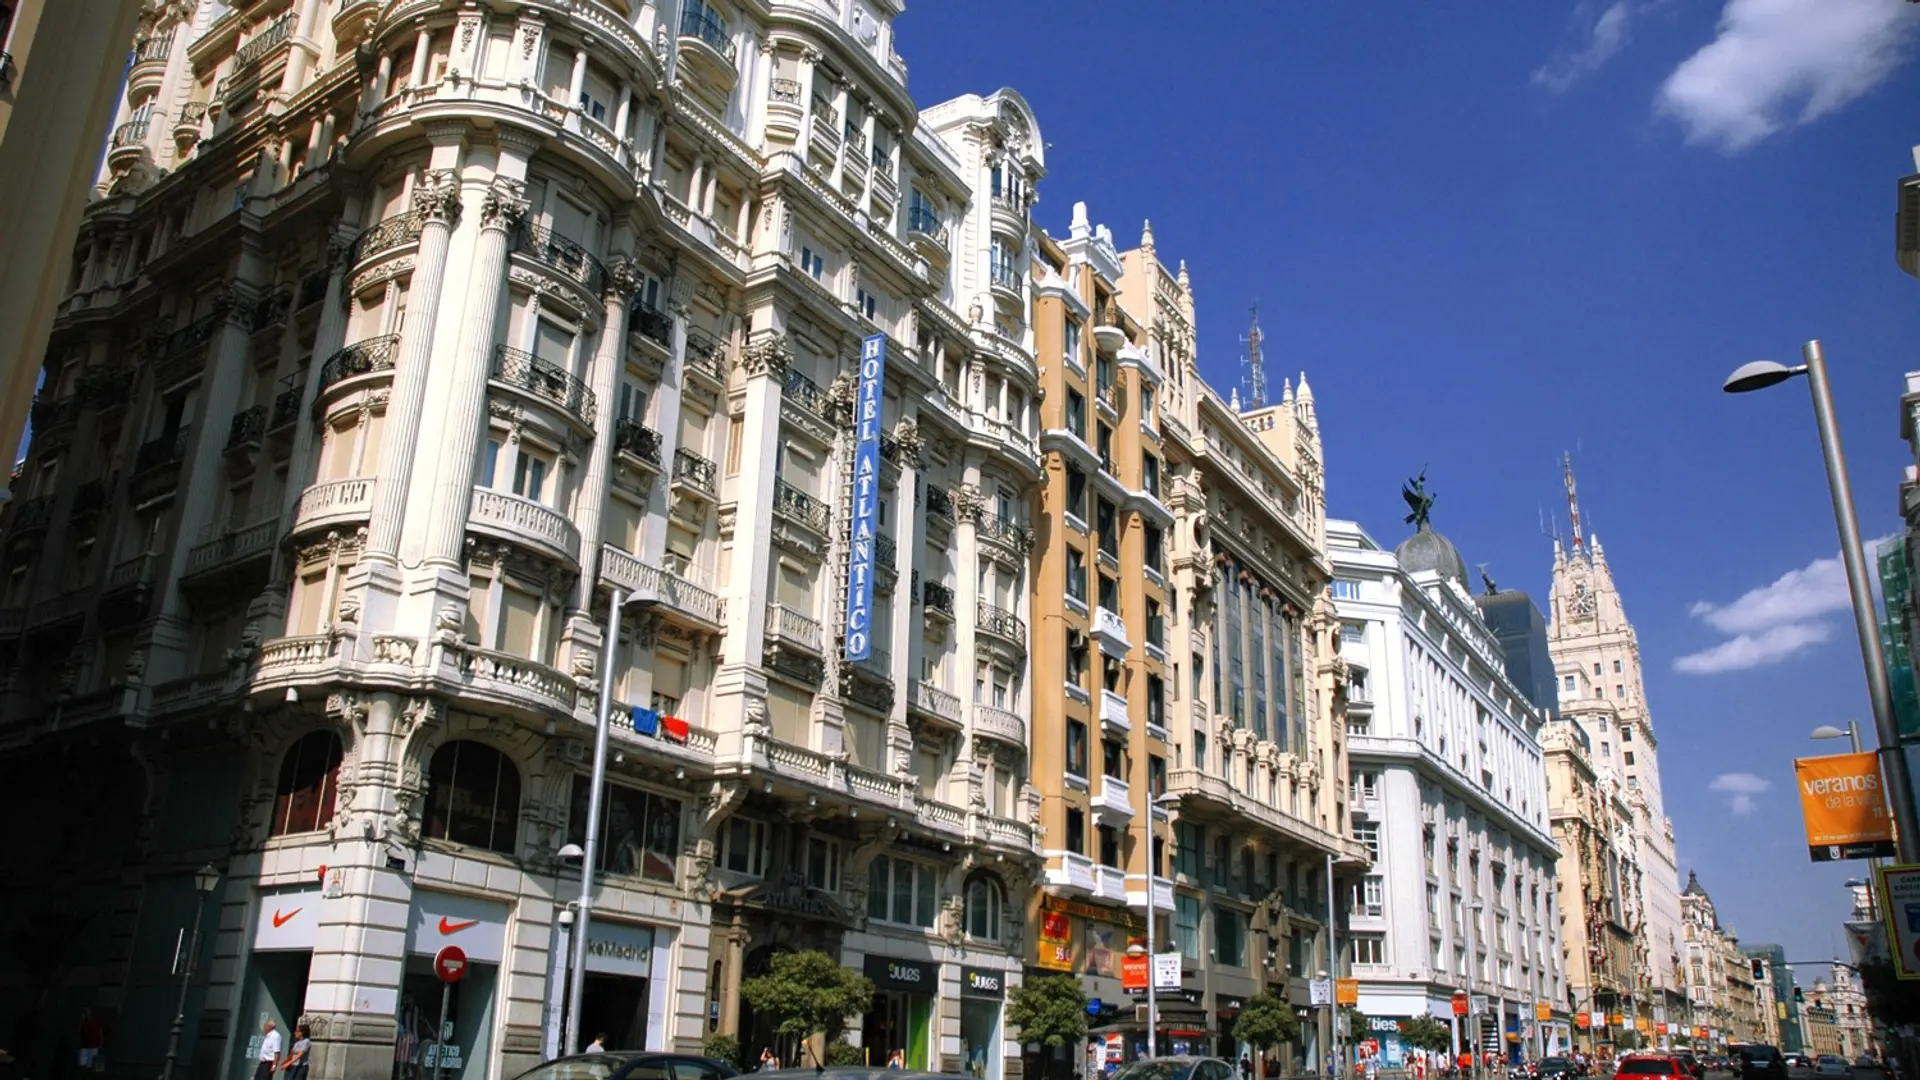 Destinations Articles - Madrid Travel Guide